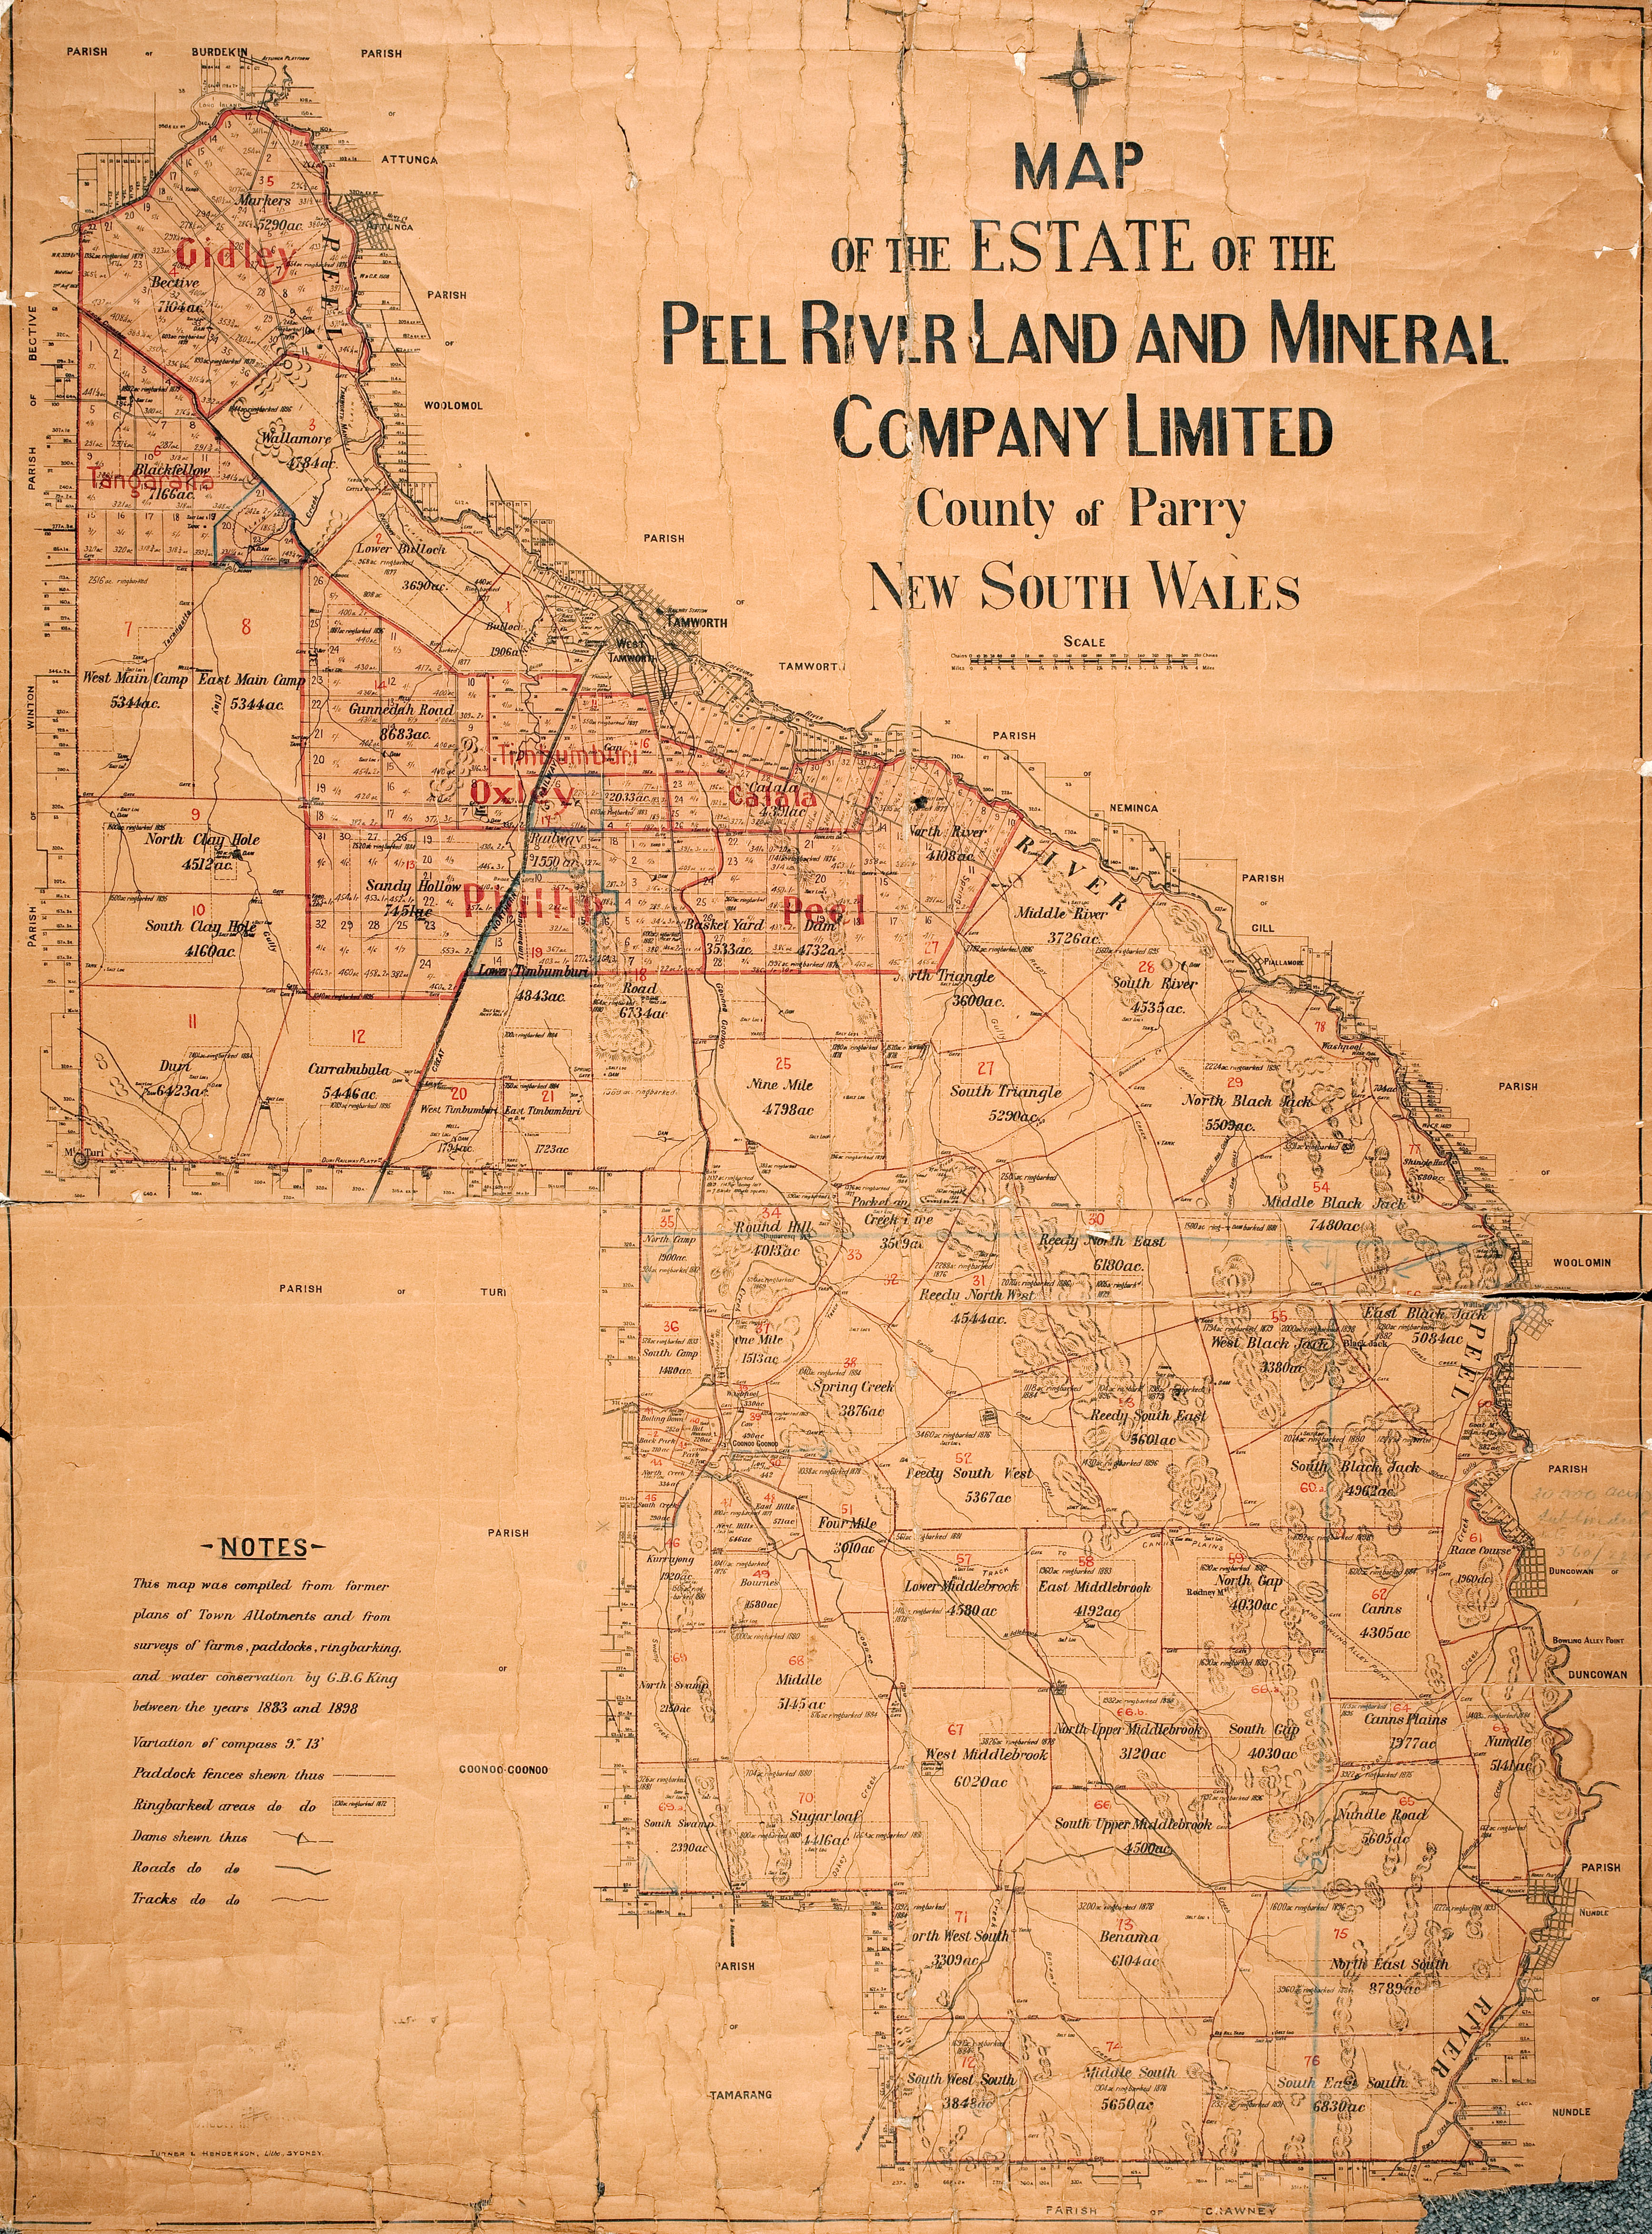 Map of the estate of the Peel River Land and Mineral Company, Northern New South Wales, compiled by George Bartholemew Gidley King, 1883 (F37). 